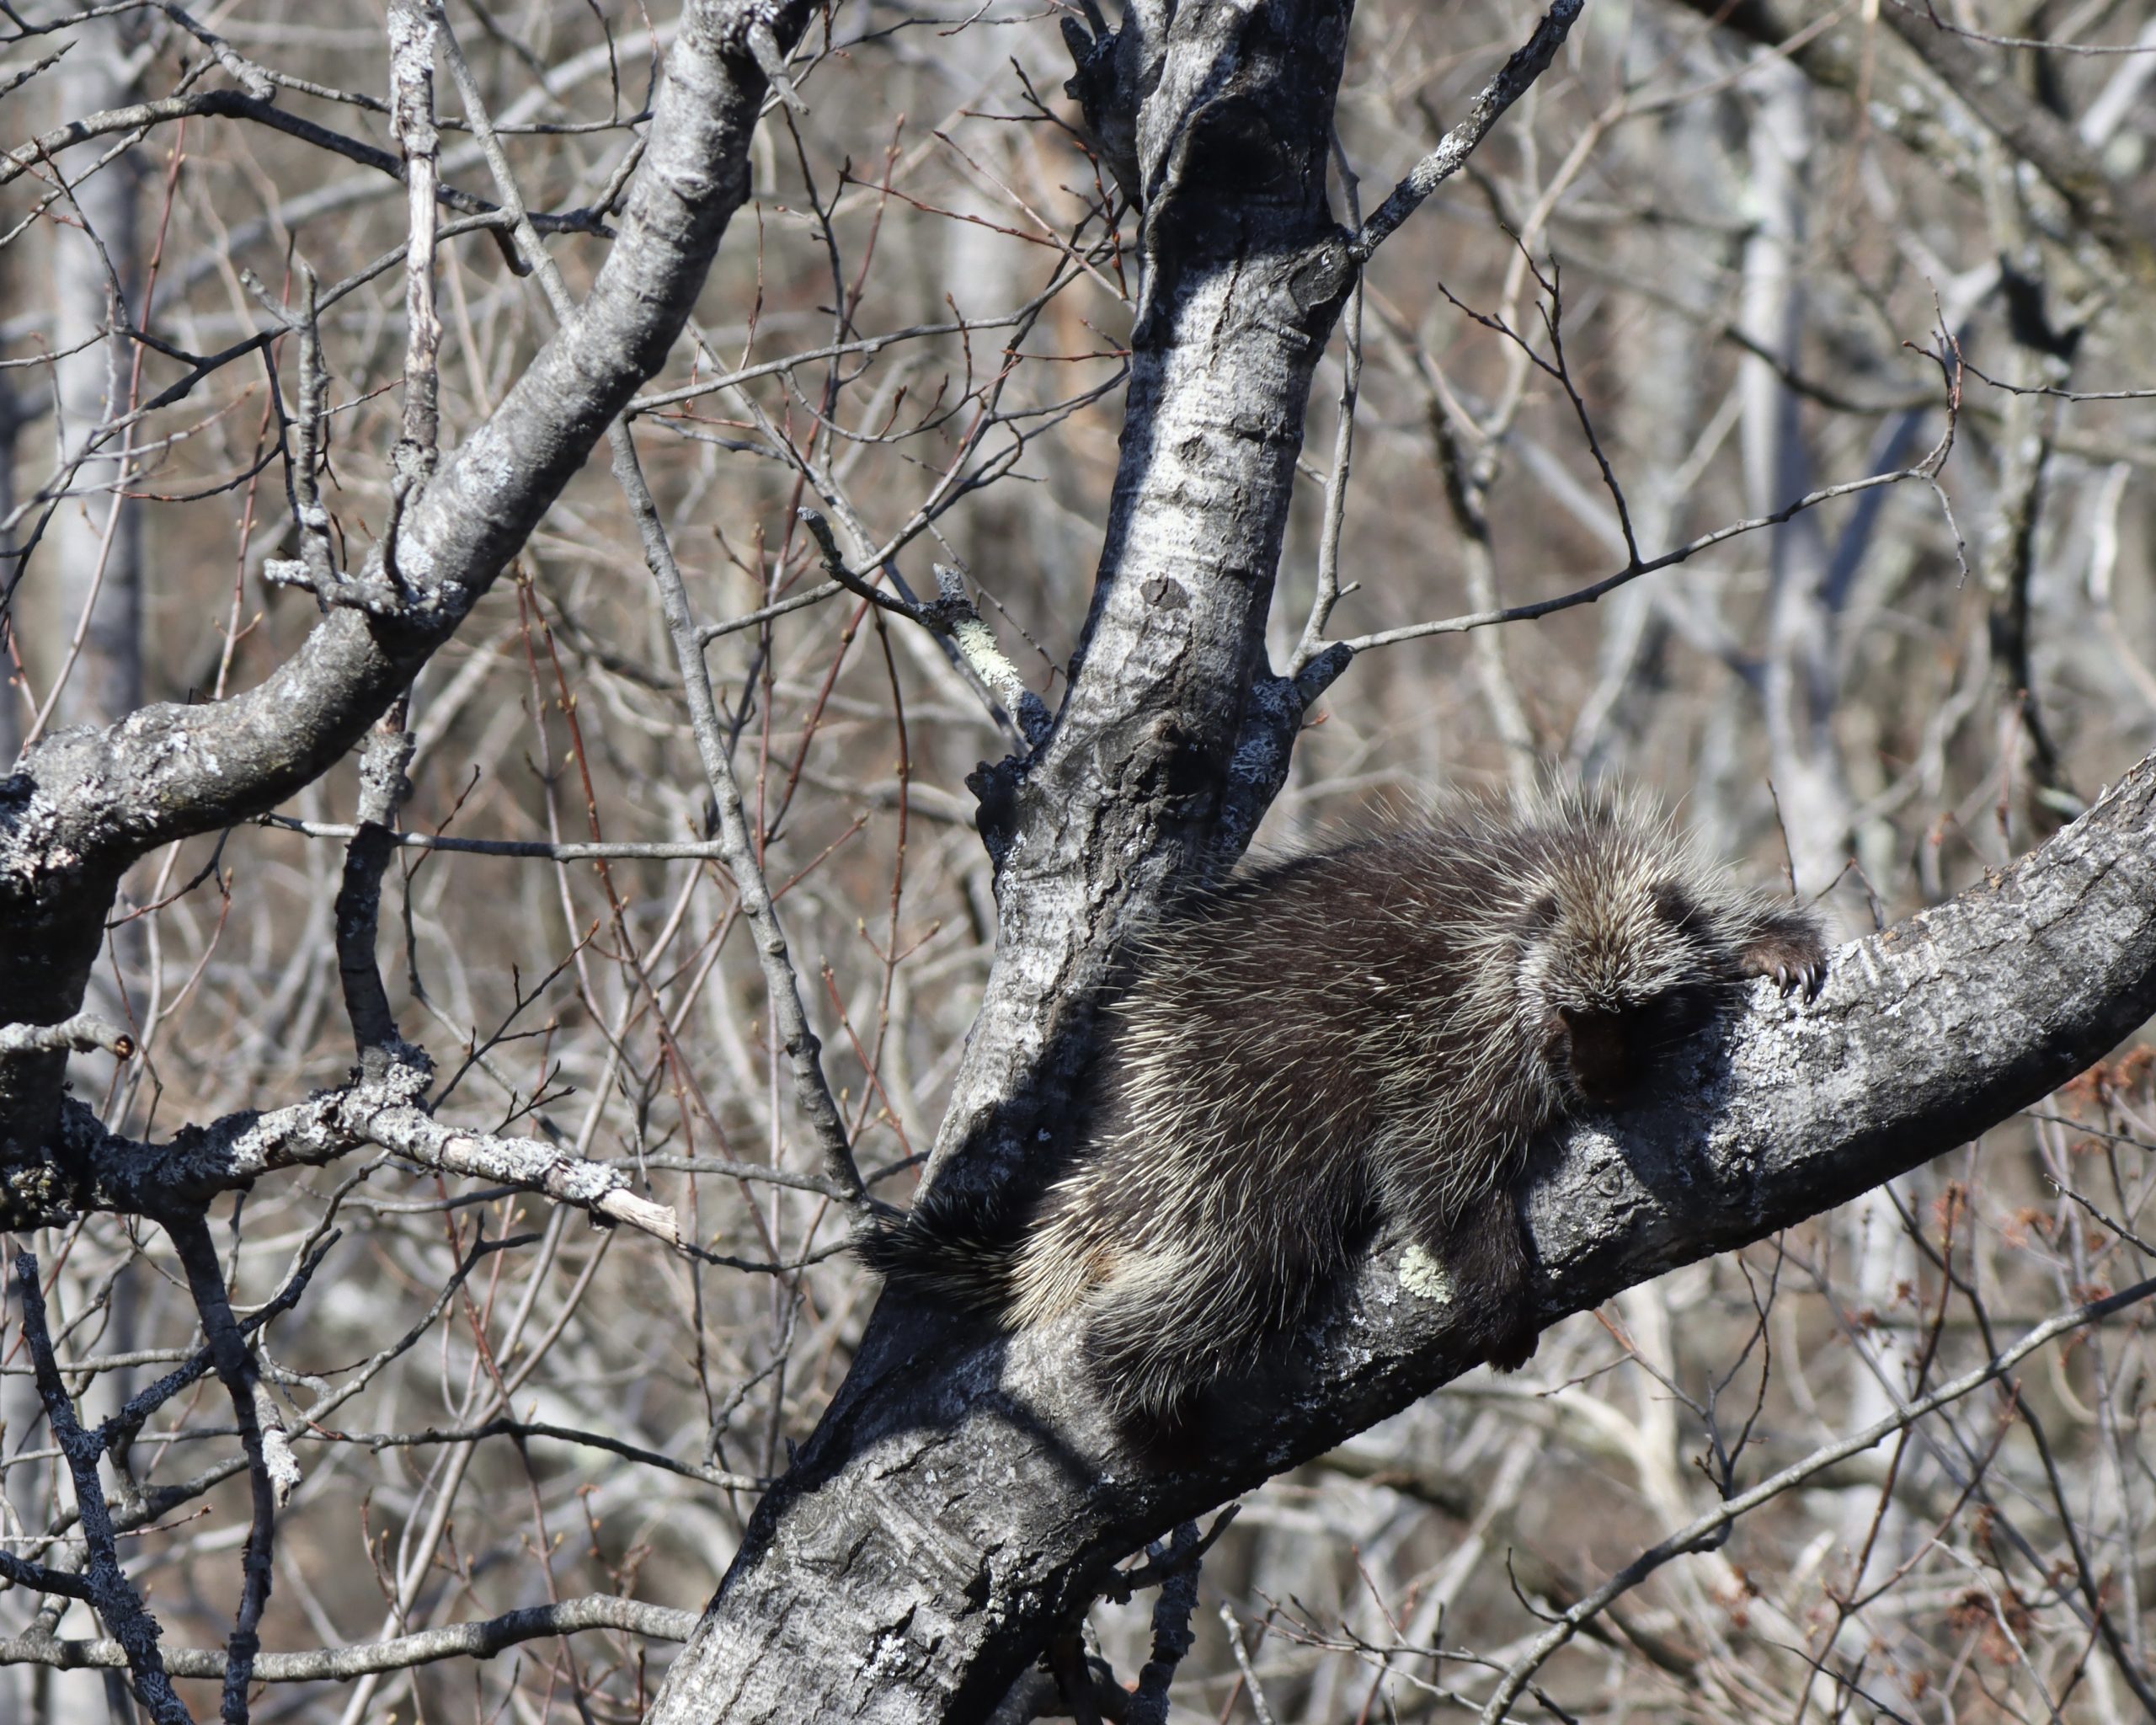 A porcupine sleeping in a tree